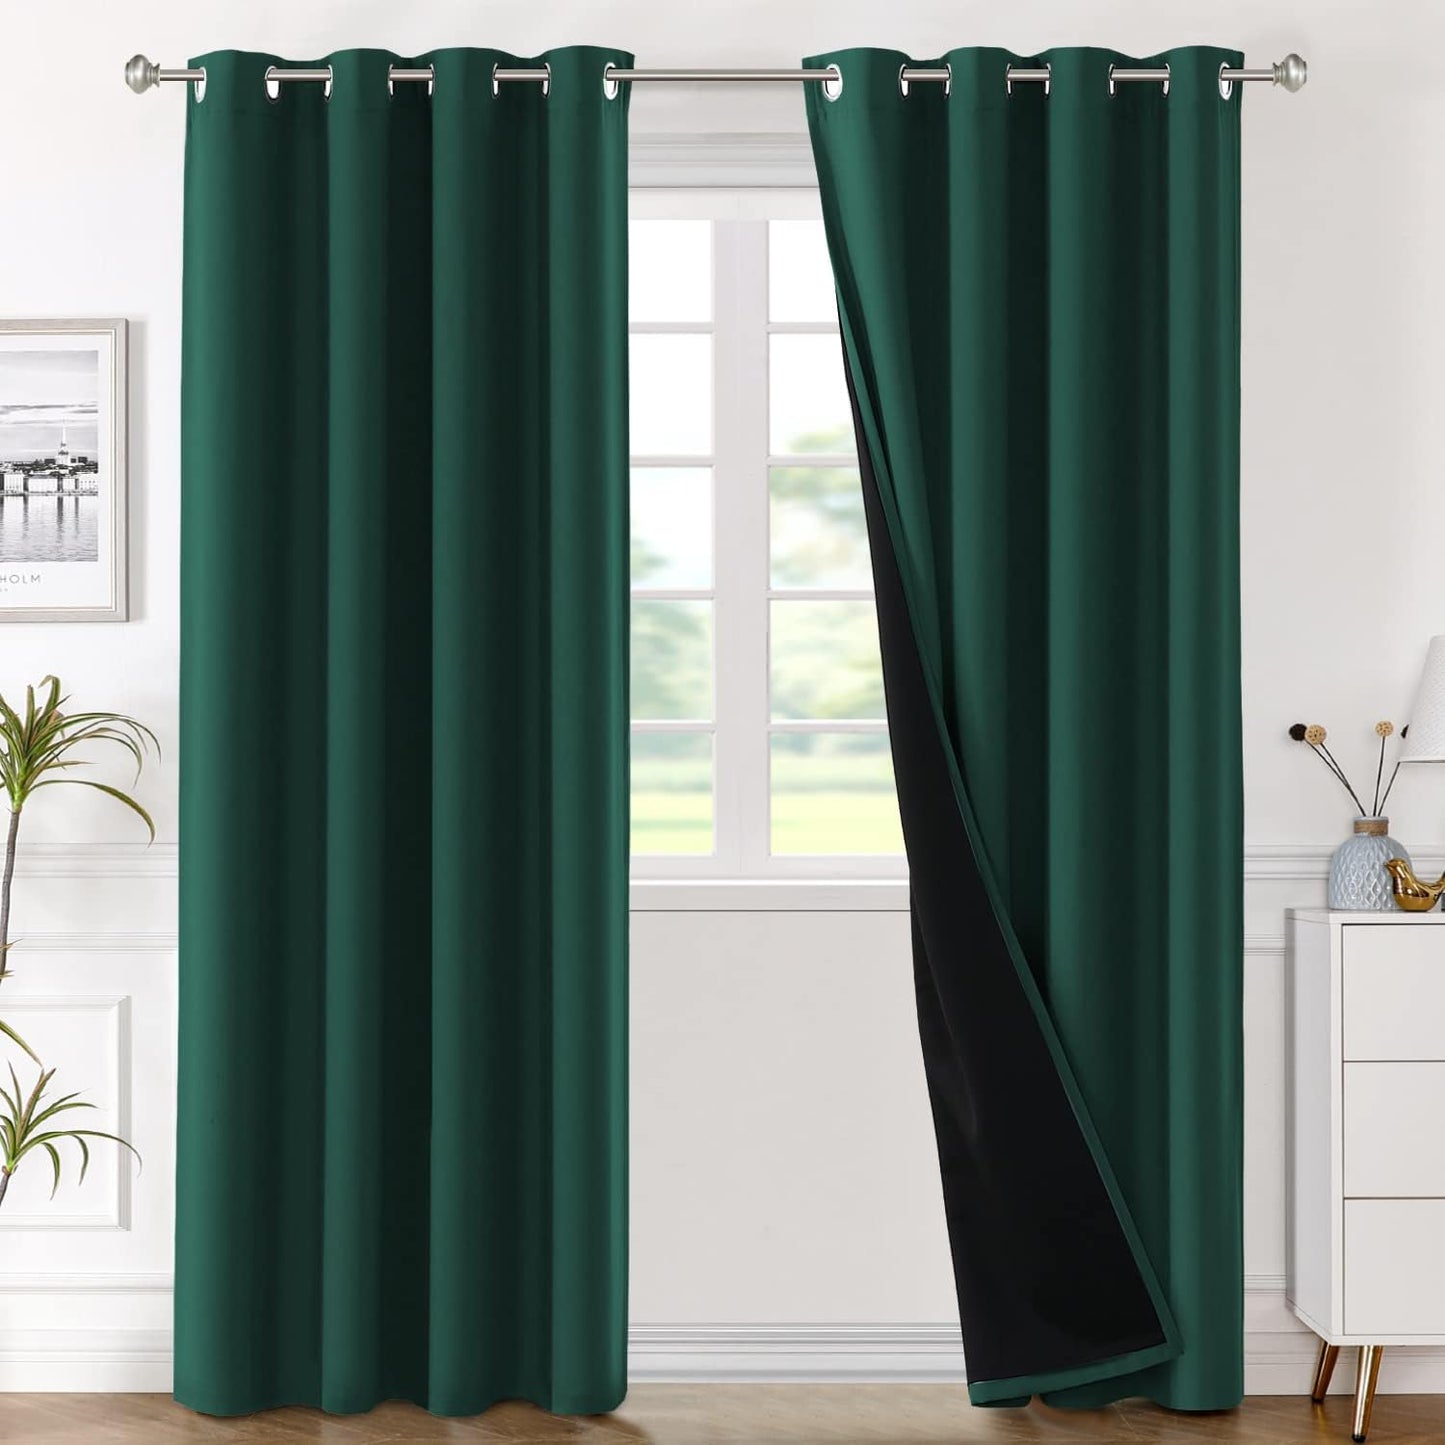 H.VERSAILTEX Blackout Curtains with Liner Backing, Thermal Insulated Curtains for Living Room, Noise Reducing Drapes, White, 52 Inches Wide X 96 Inches Long per Panel, Set of 2 Panels  H.VERSAILTEX Hunter Green 52"W X 96"L 